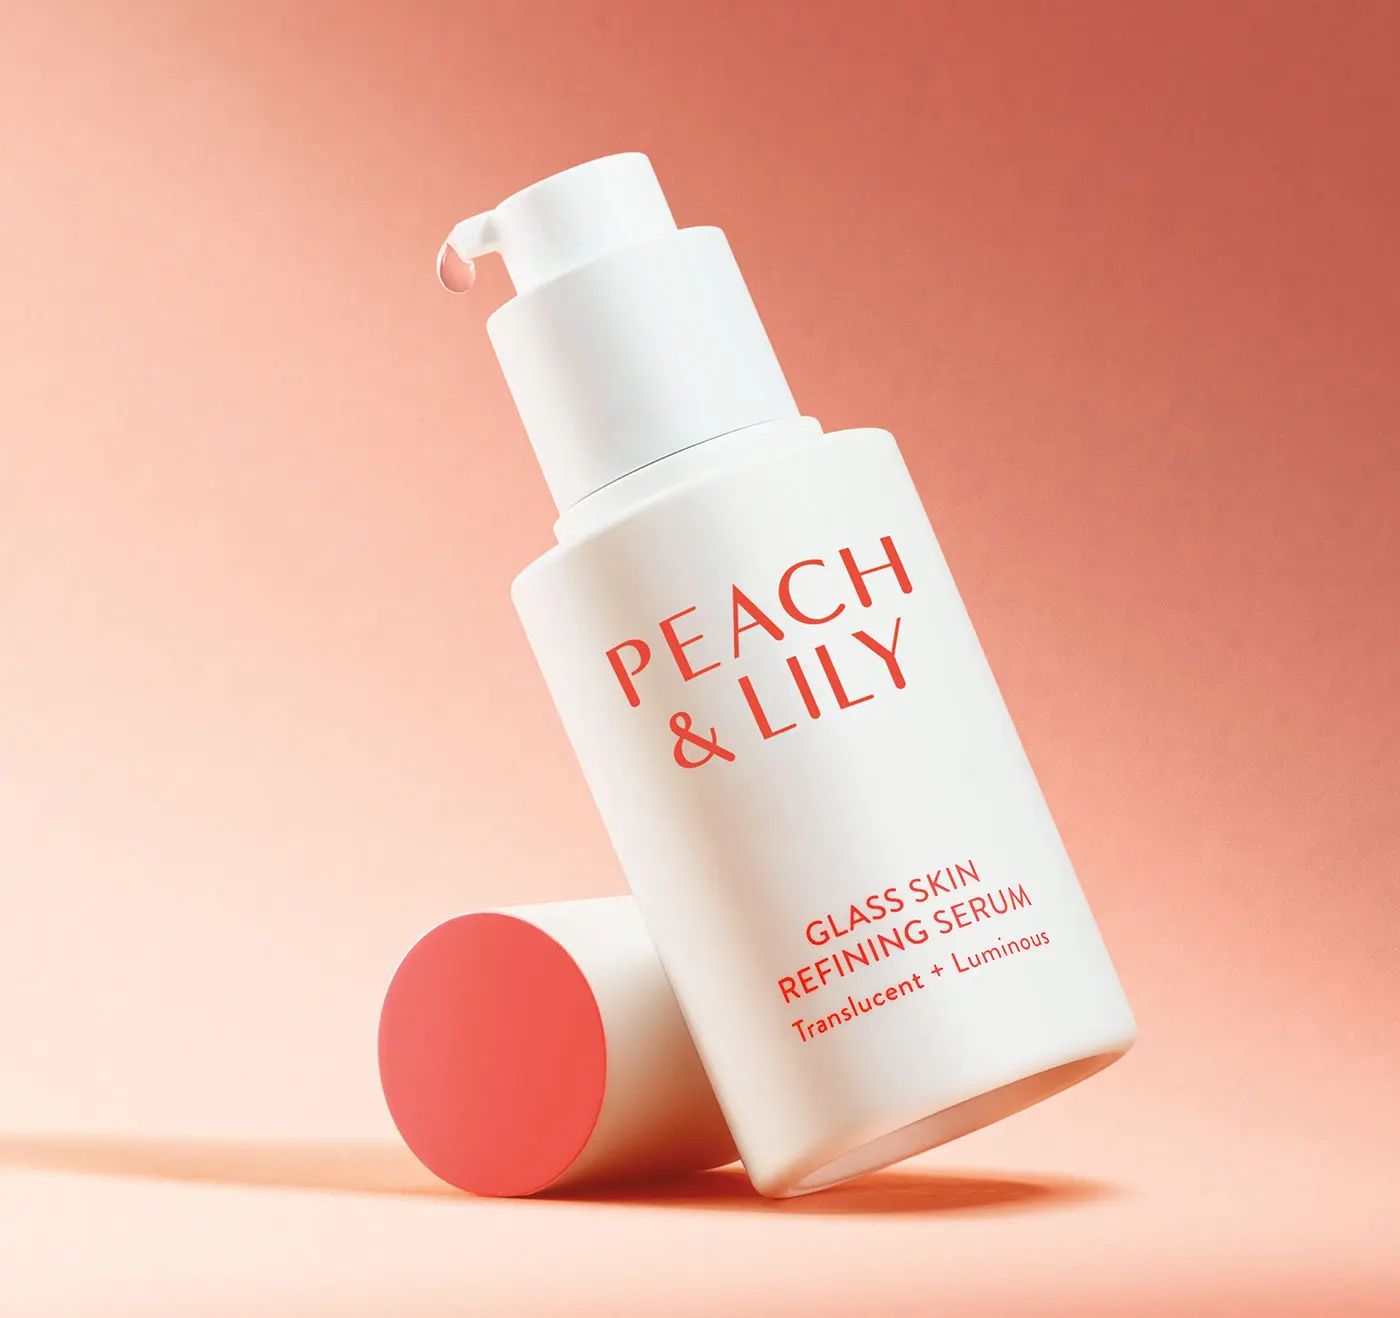 Peach & Lily | Peach and Lily, Inc.